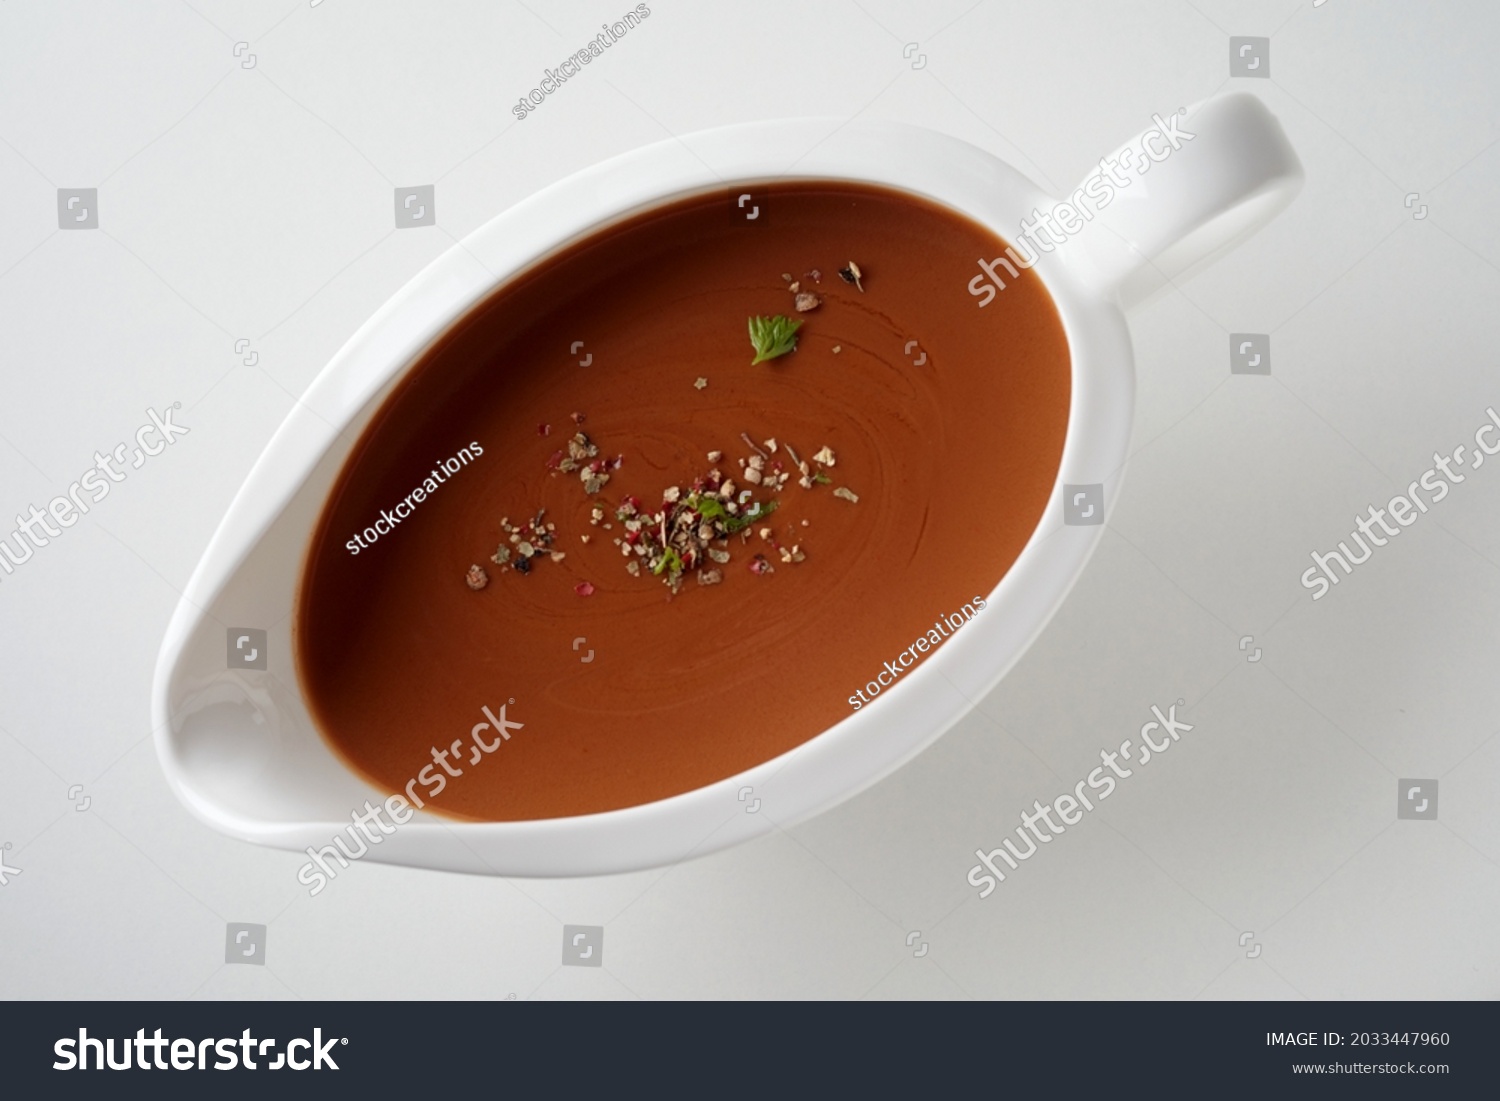 Top view of brown sauce with herbs and spices in ceramic gravy boat place on white surface #2033447960